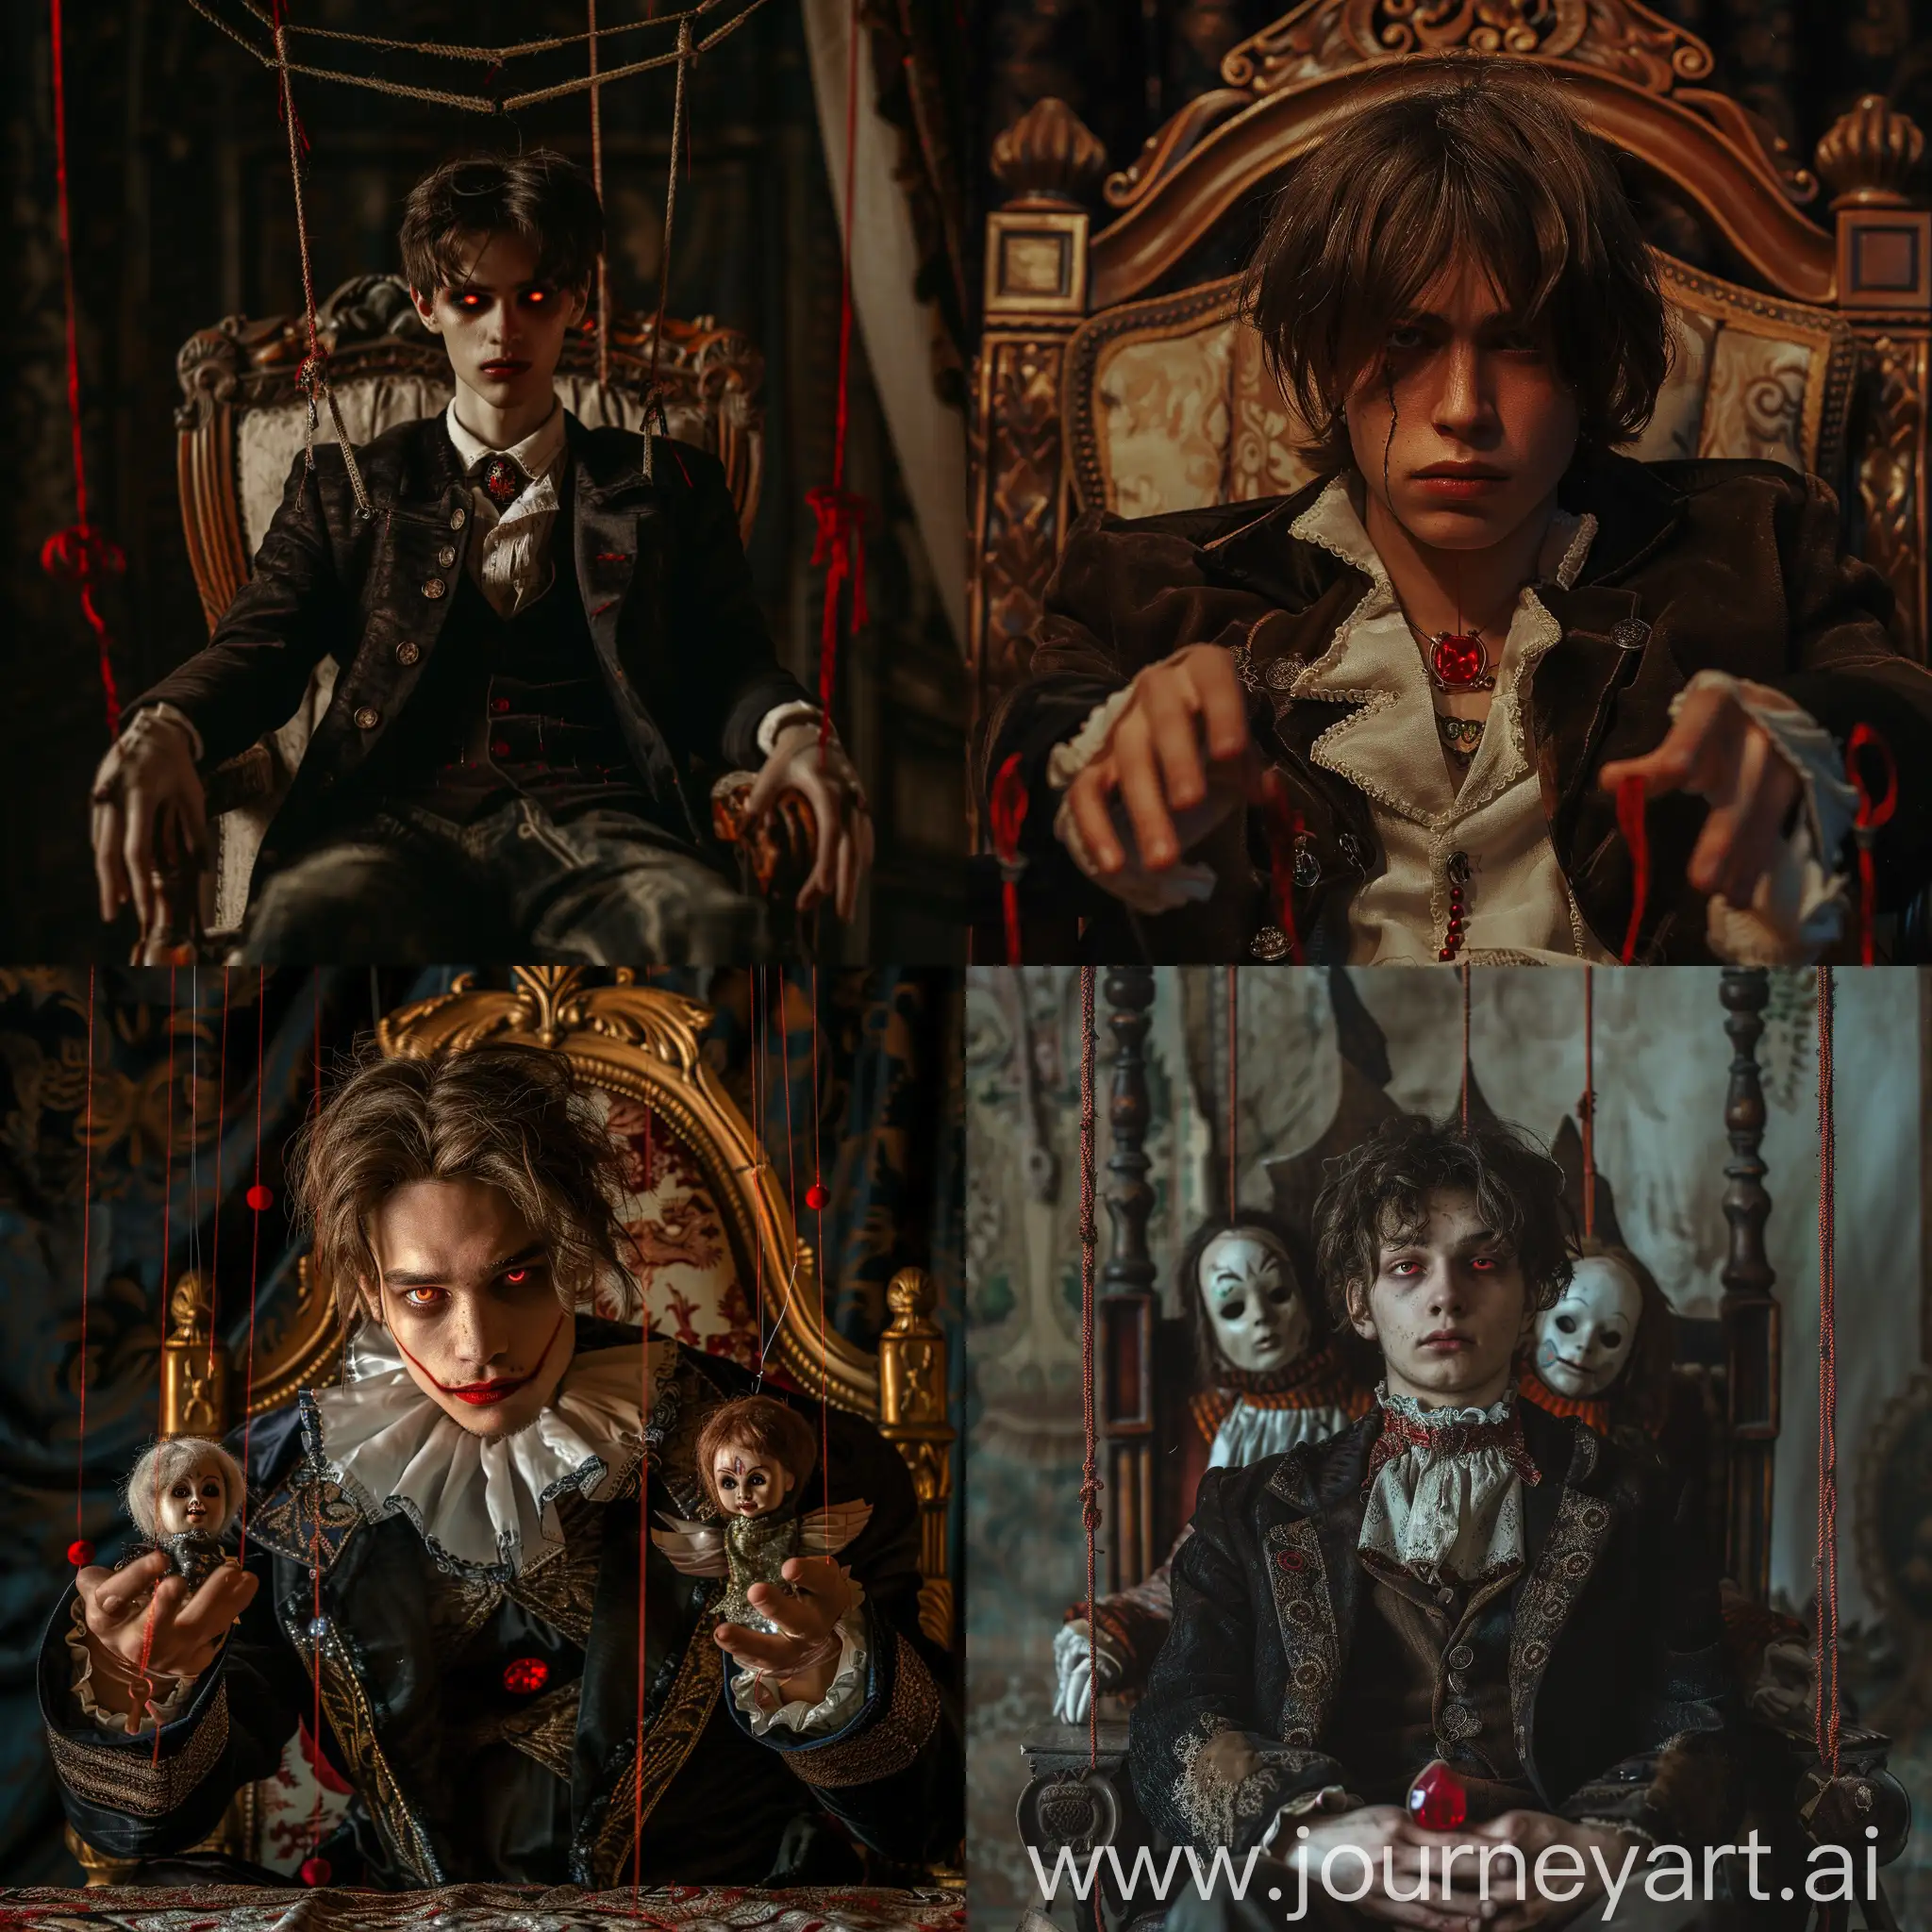 Realistic photo of a man, A young guy, without a beard, fair skin, pointed chin, medium-long brown hair falling over his shoulders bangs, red eyes glowing, sitting on a throne, jacket, a white handkerchief with a red stone in the middle on his neck , red threads on his fingers, controls 2 puppets over a beautiful table, on puppets in Dancing, realistic style